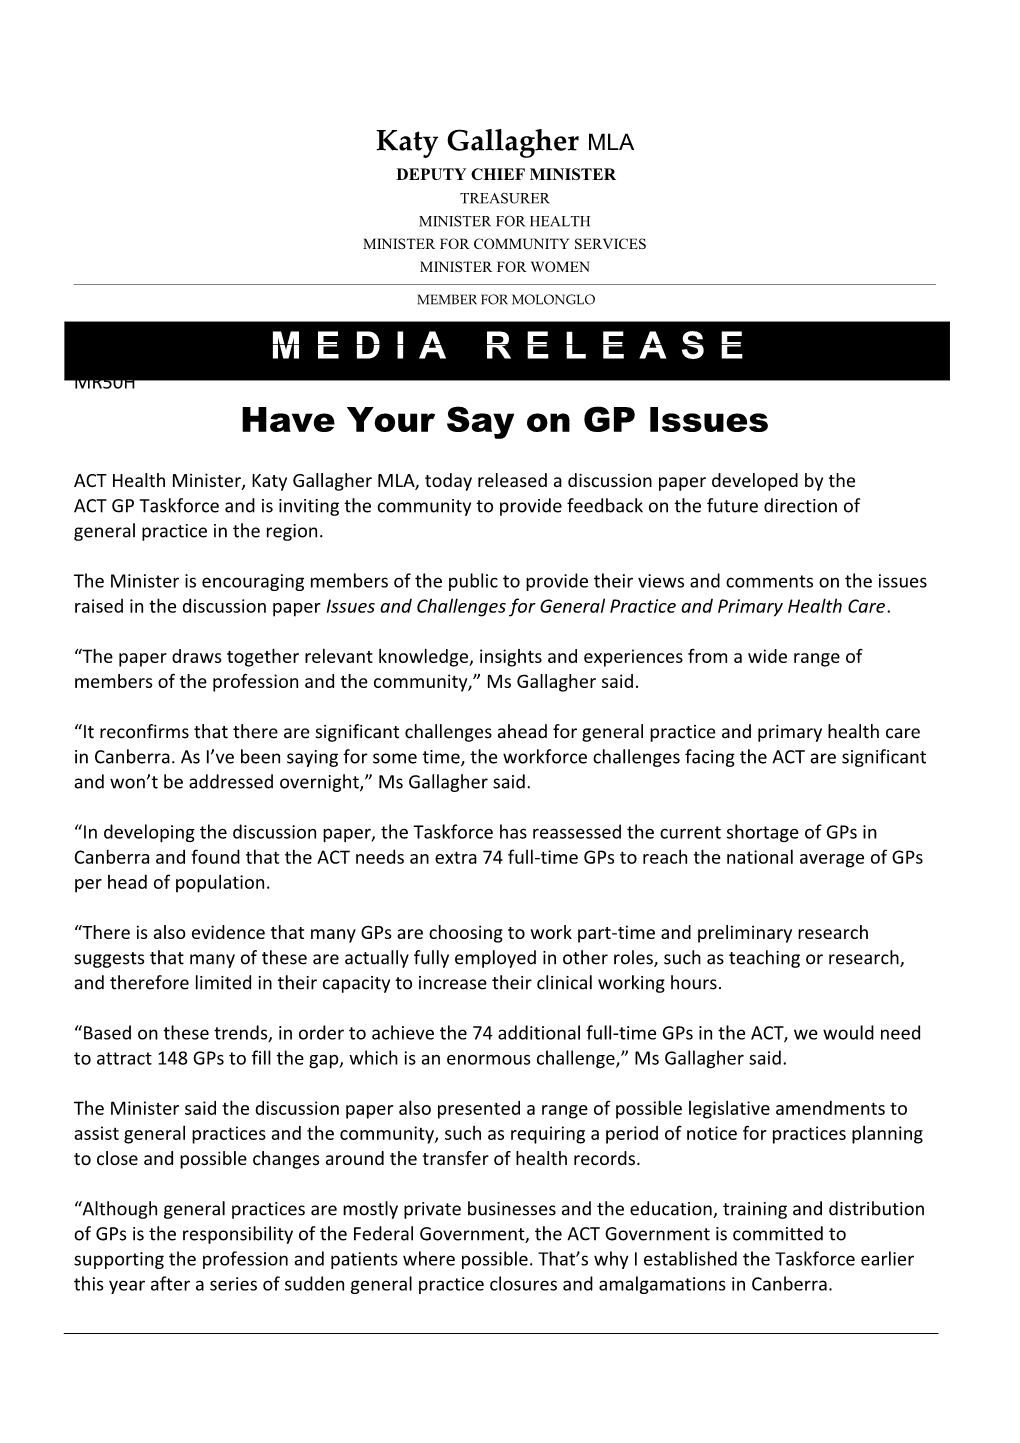 Have Your Say on GP Issues